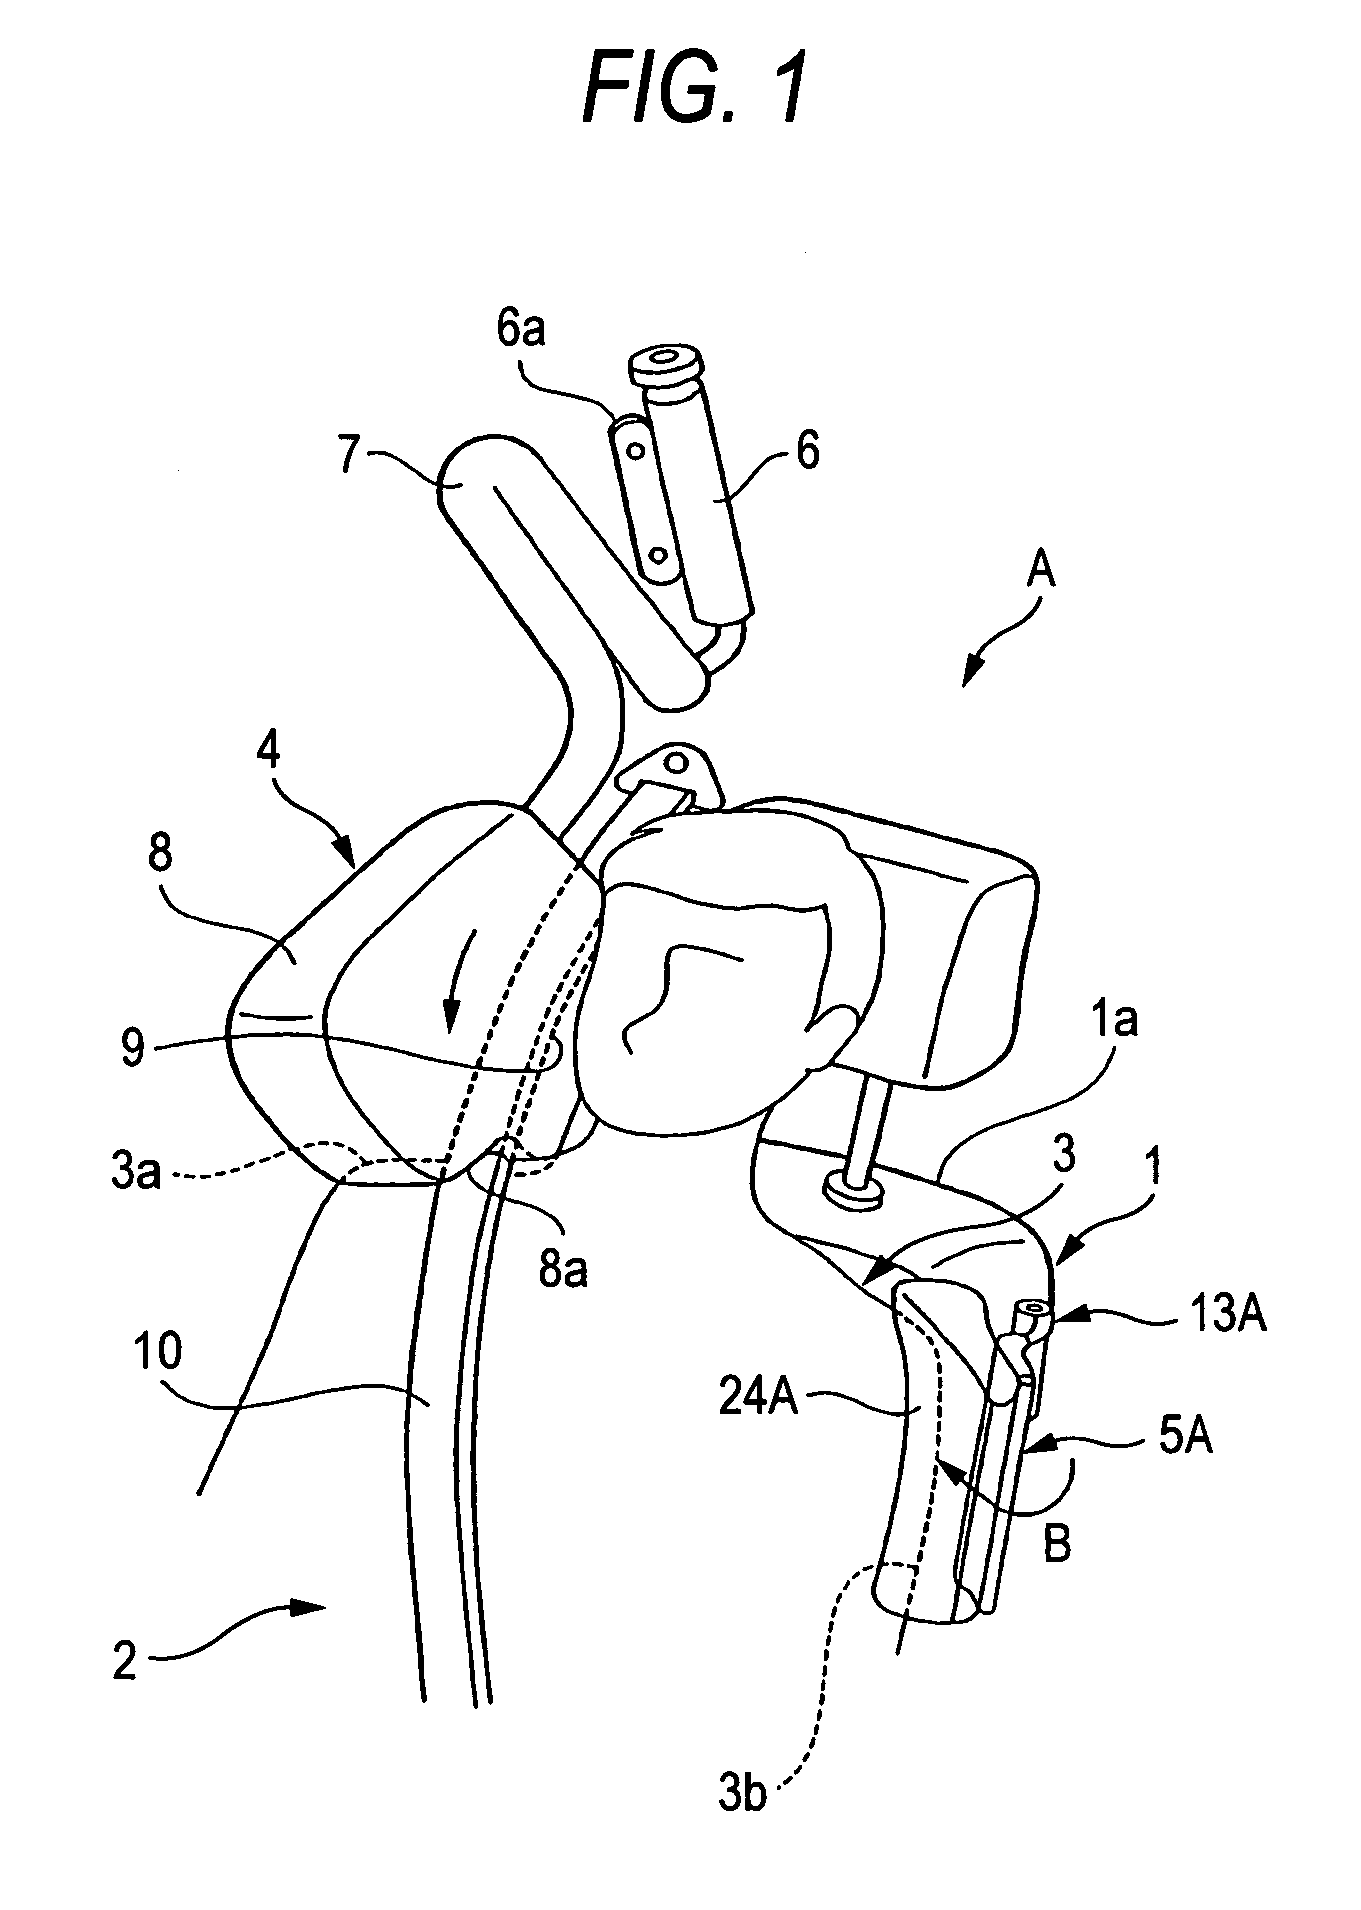 Occupant restraint device and occupant restraint system